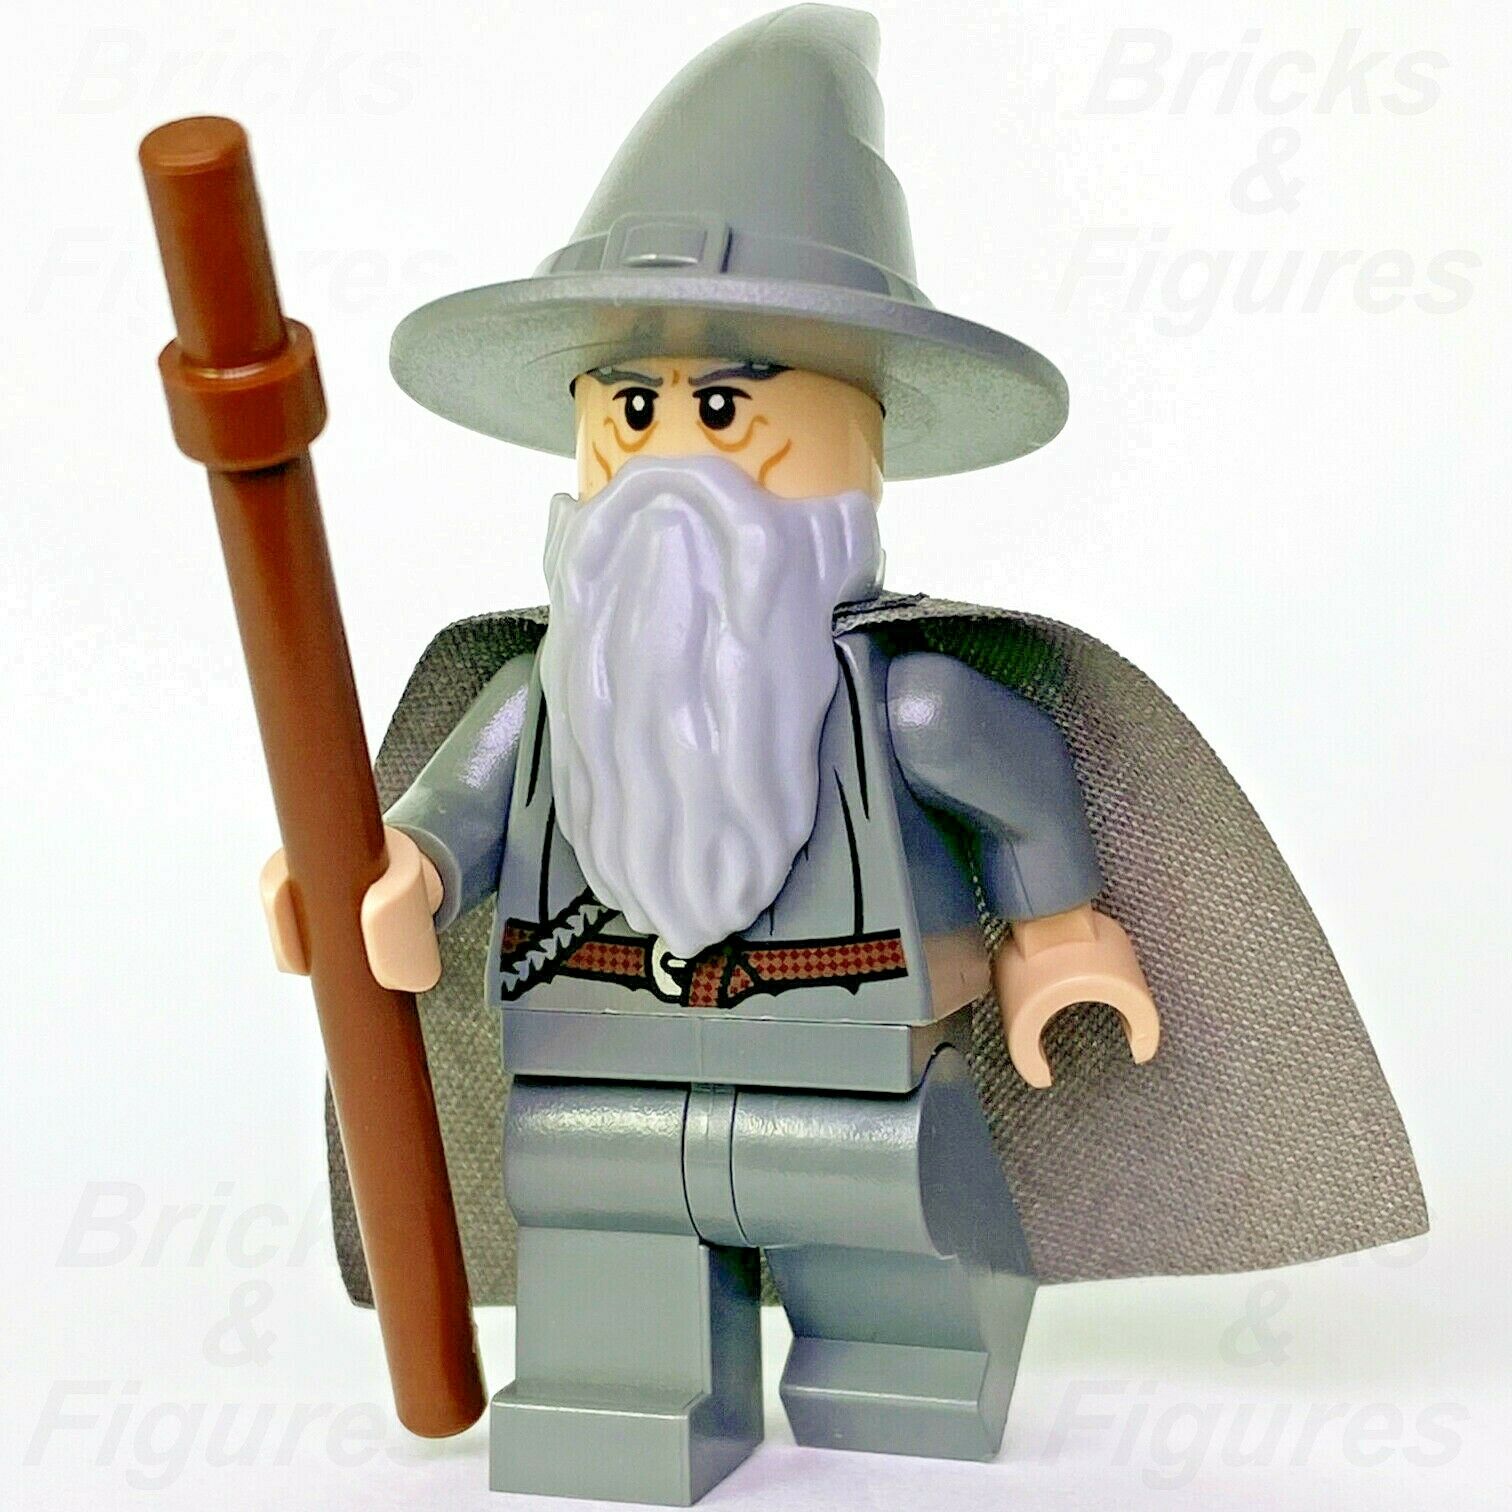 The Lord of the Rings LEGO Gandalf the Grey The Hobbit Minifigure 9469 lor001 - Bricks & Figures